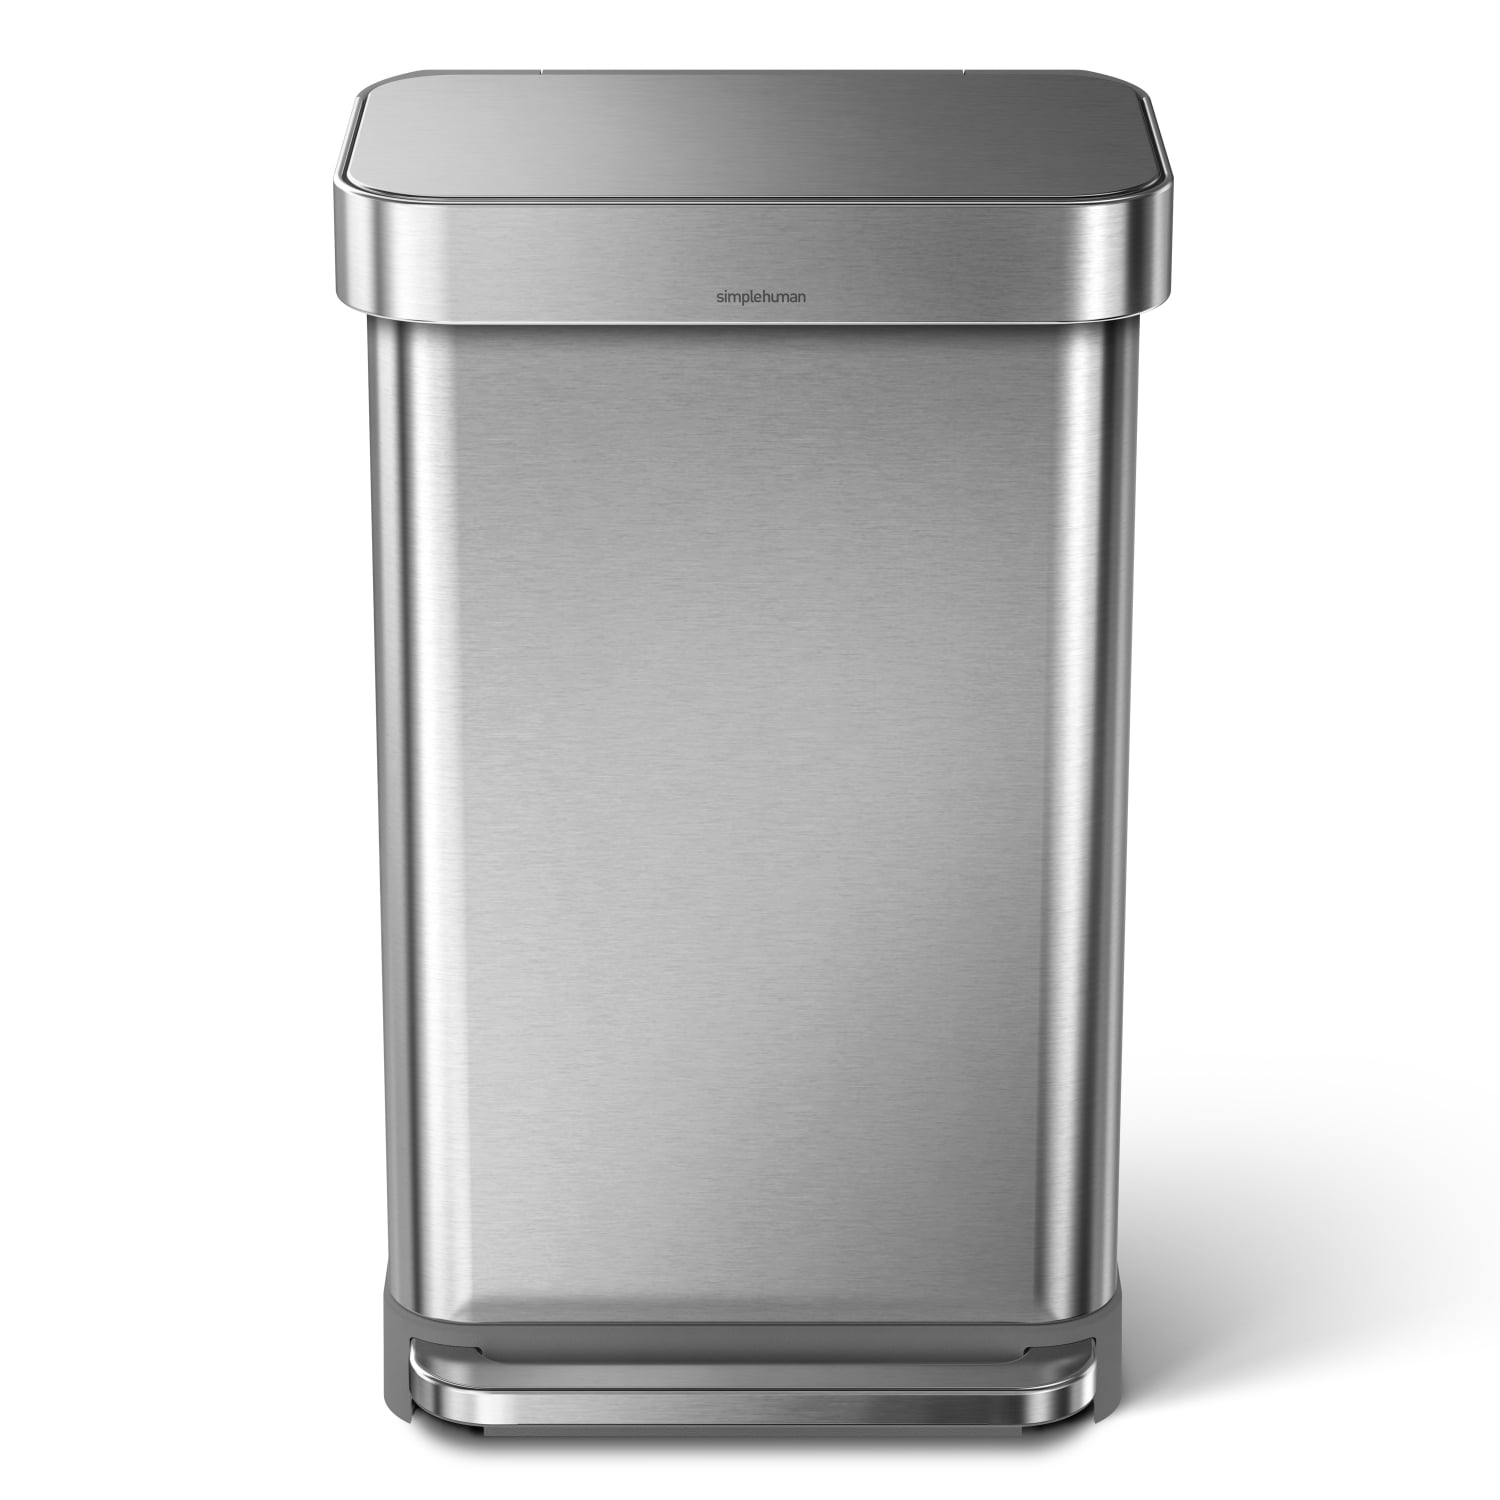 simplehuman 58 Liter Voice Activated 15.3 Gallon Stainless Steel Touch-Free Rectangular Kitchen Sensor Trash Can with Voice and Motion Sensor White Steel